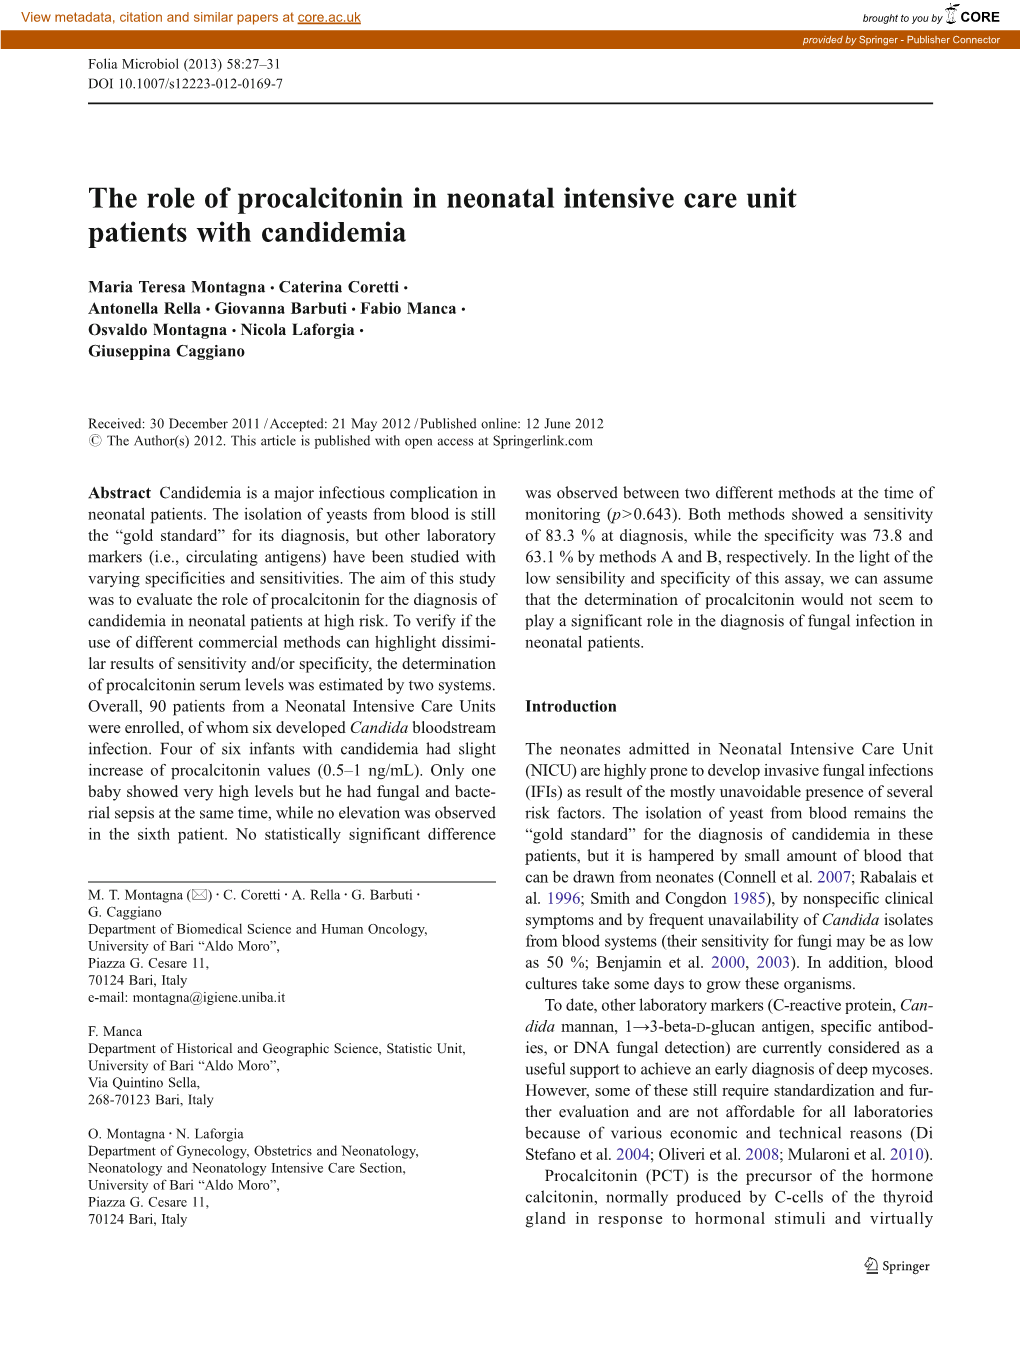 The Role of Procalcitonin in Neonatal Intensive Care Unit Patients with Candidemia